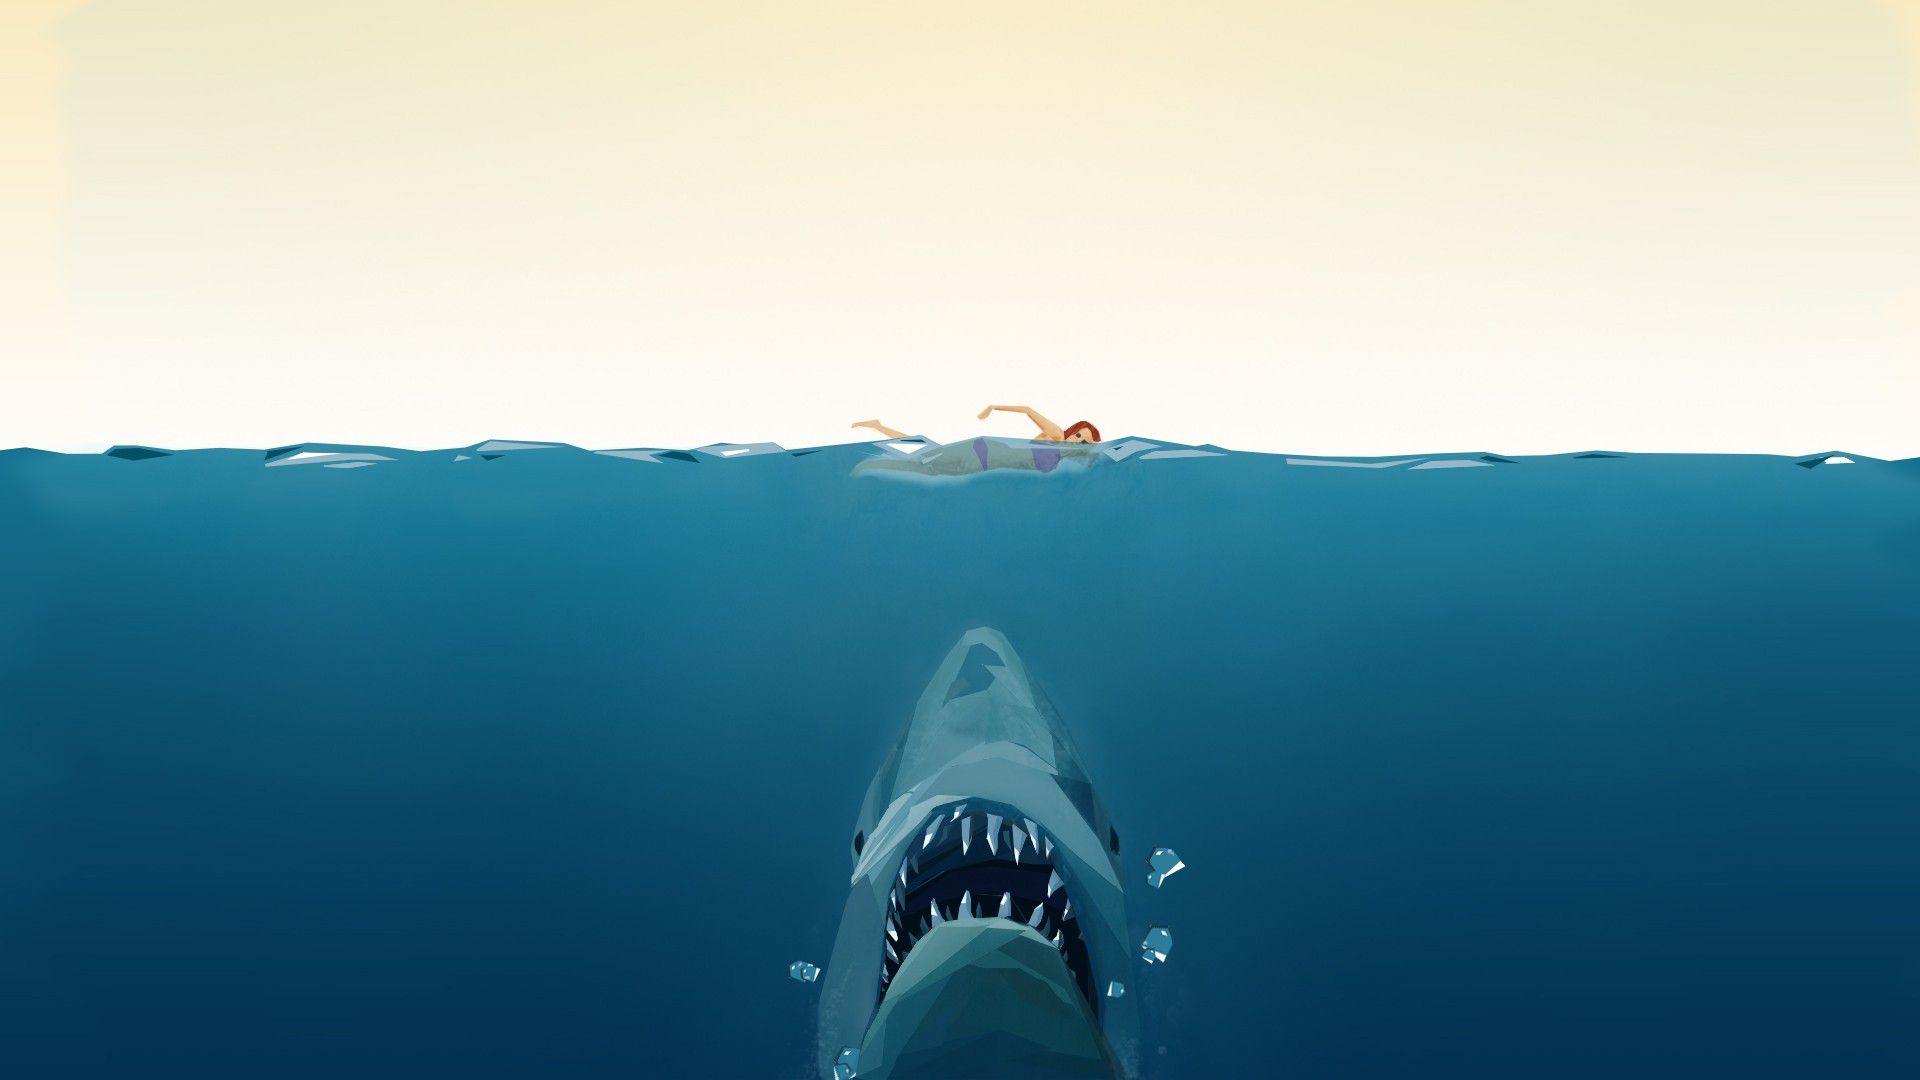 Jaws Background. Jaws Wallpaper, Shark